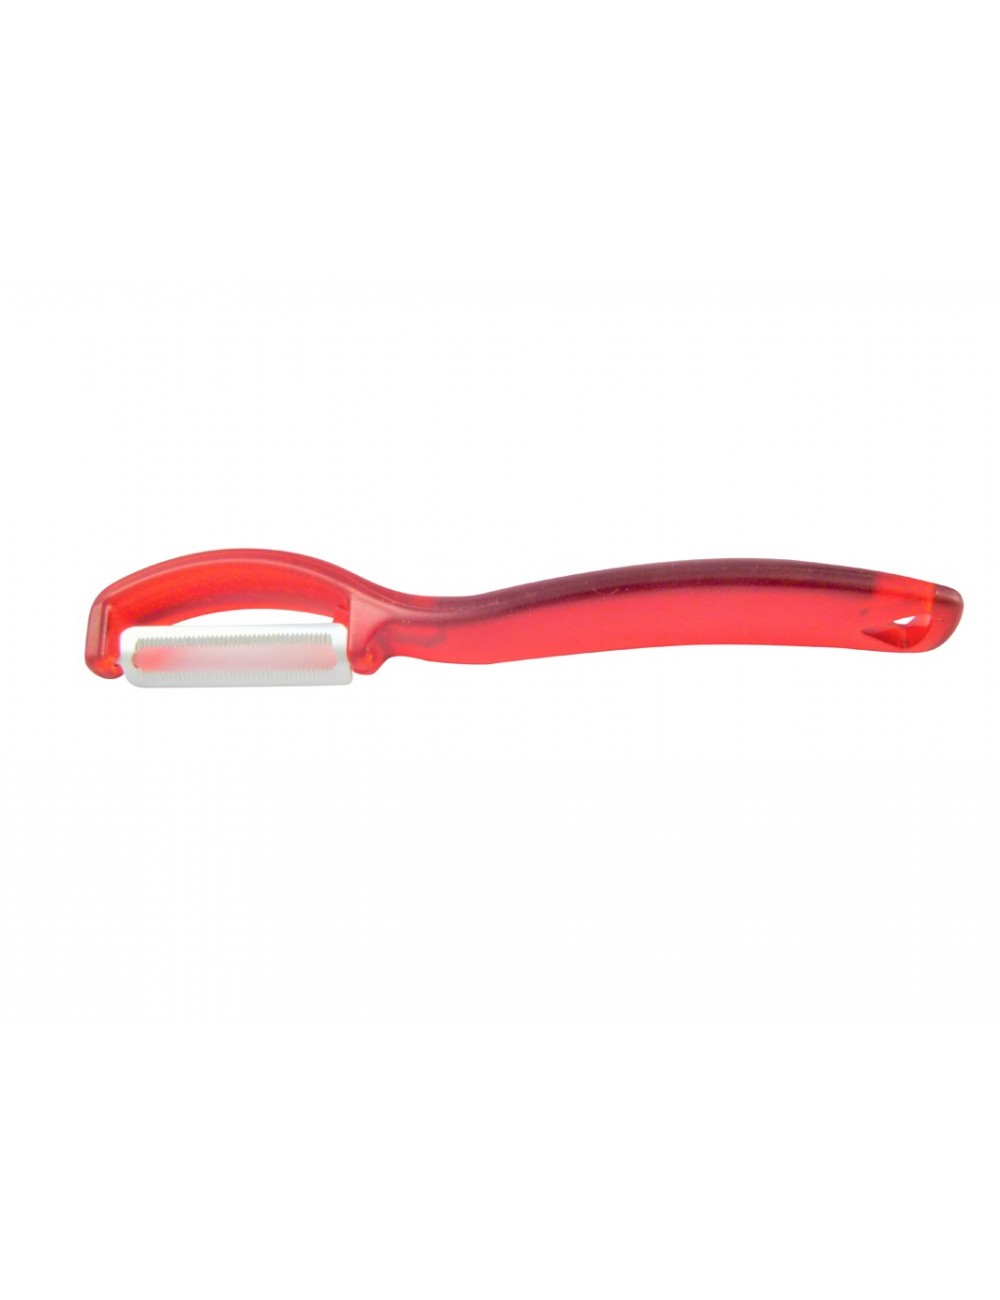 PEELER WITH MOBILE BLADE - RED HANDLE